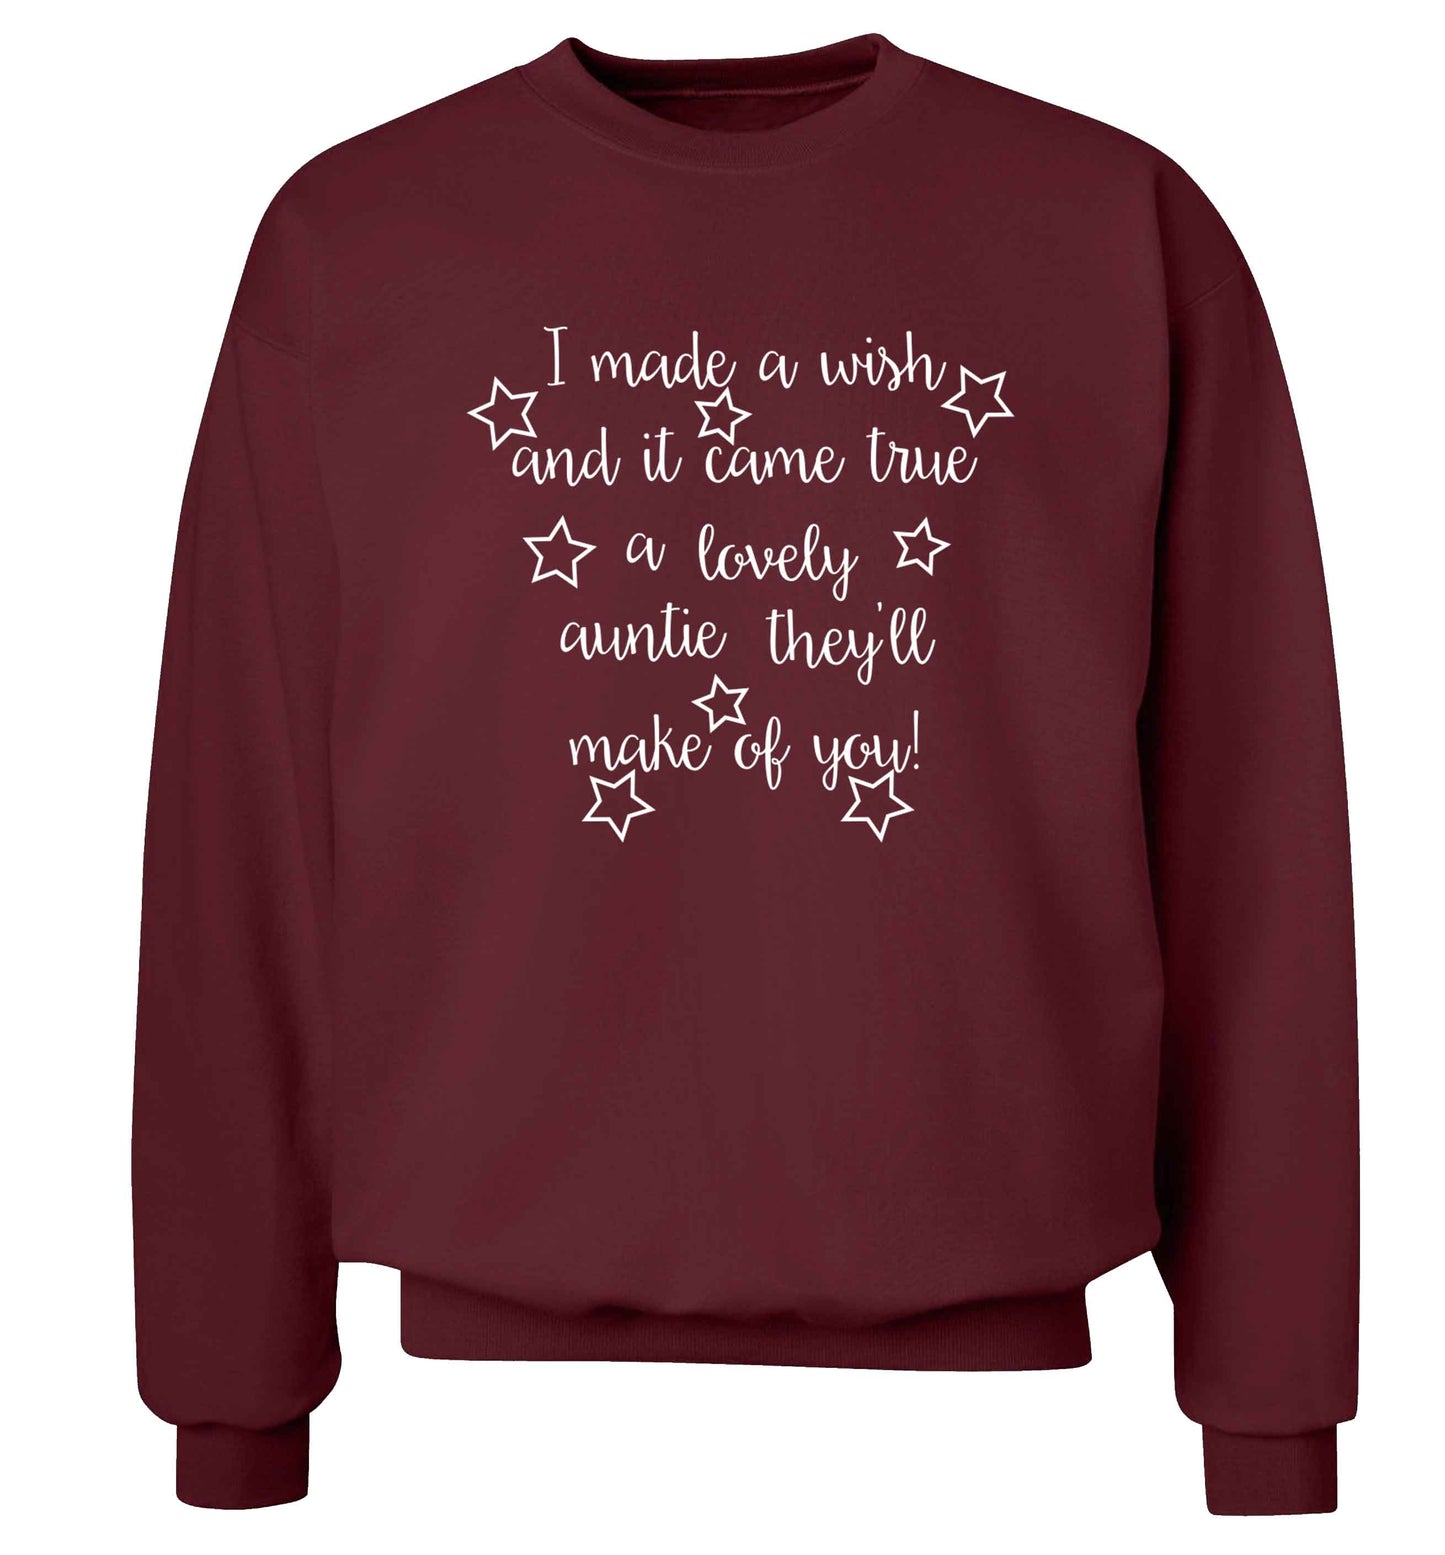 I made a wish and it came true a lovely auntie they'll make of you! Adult's unisex maroon Sweater 2XL